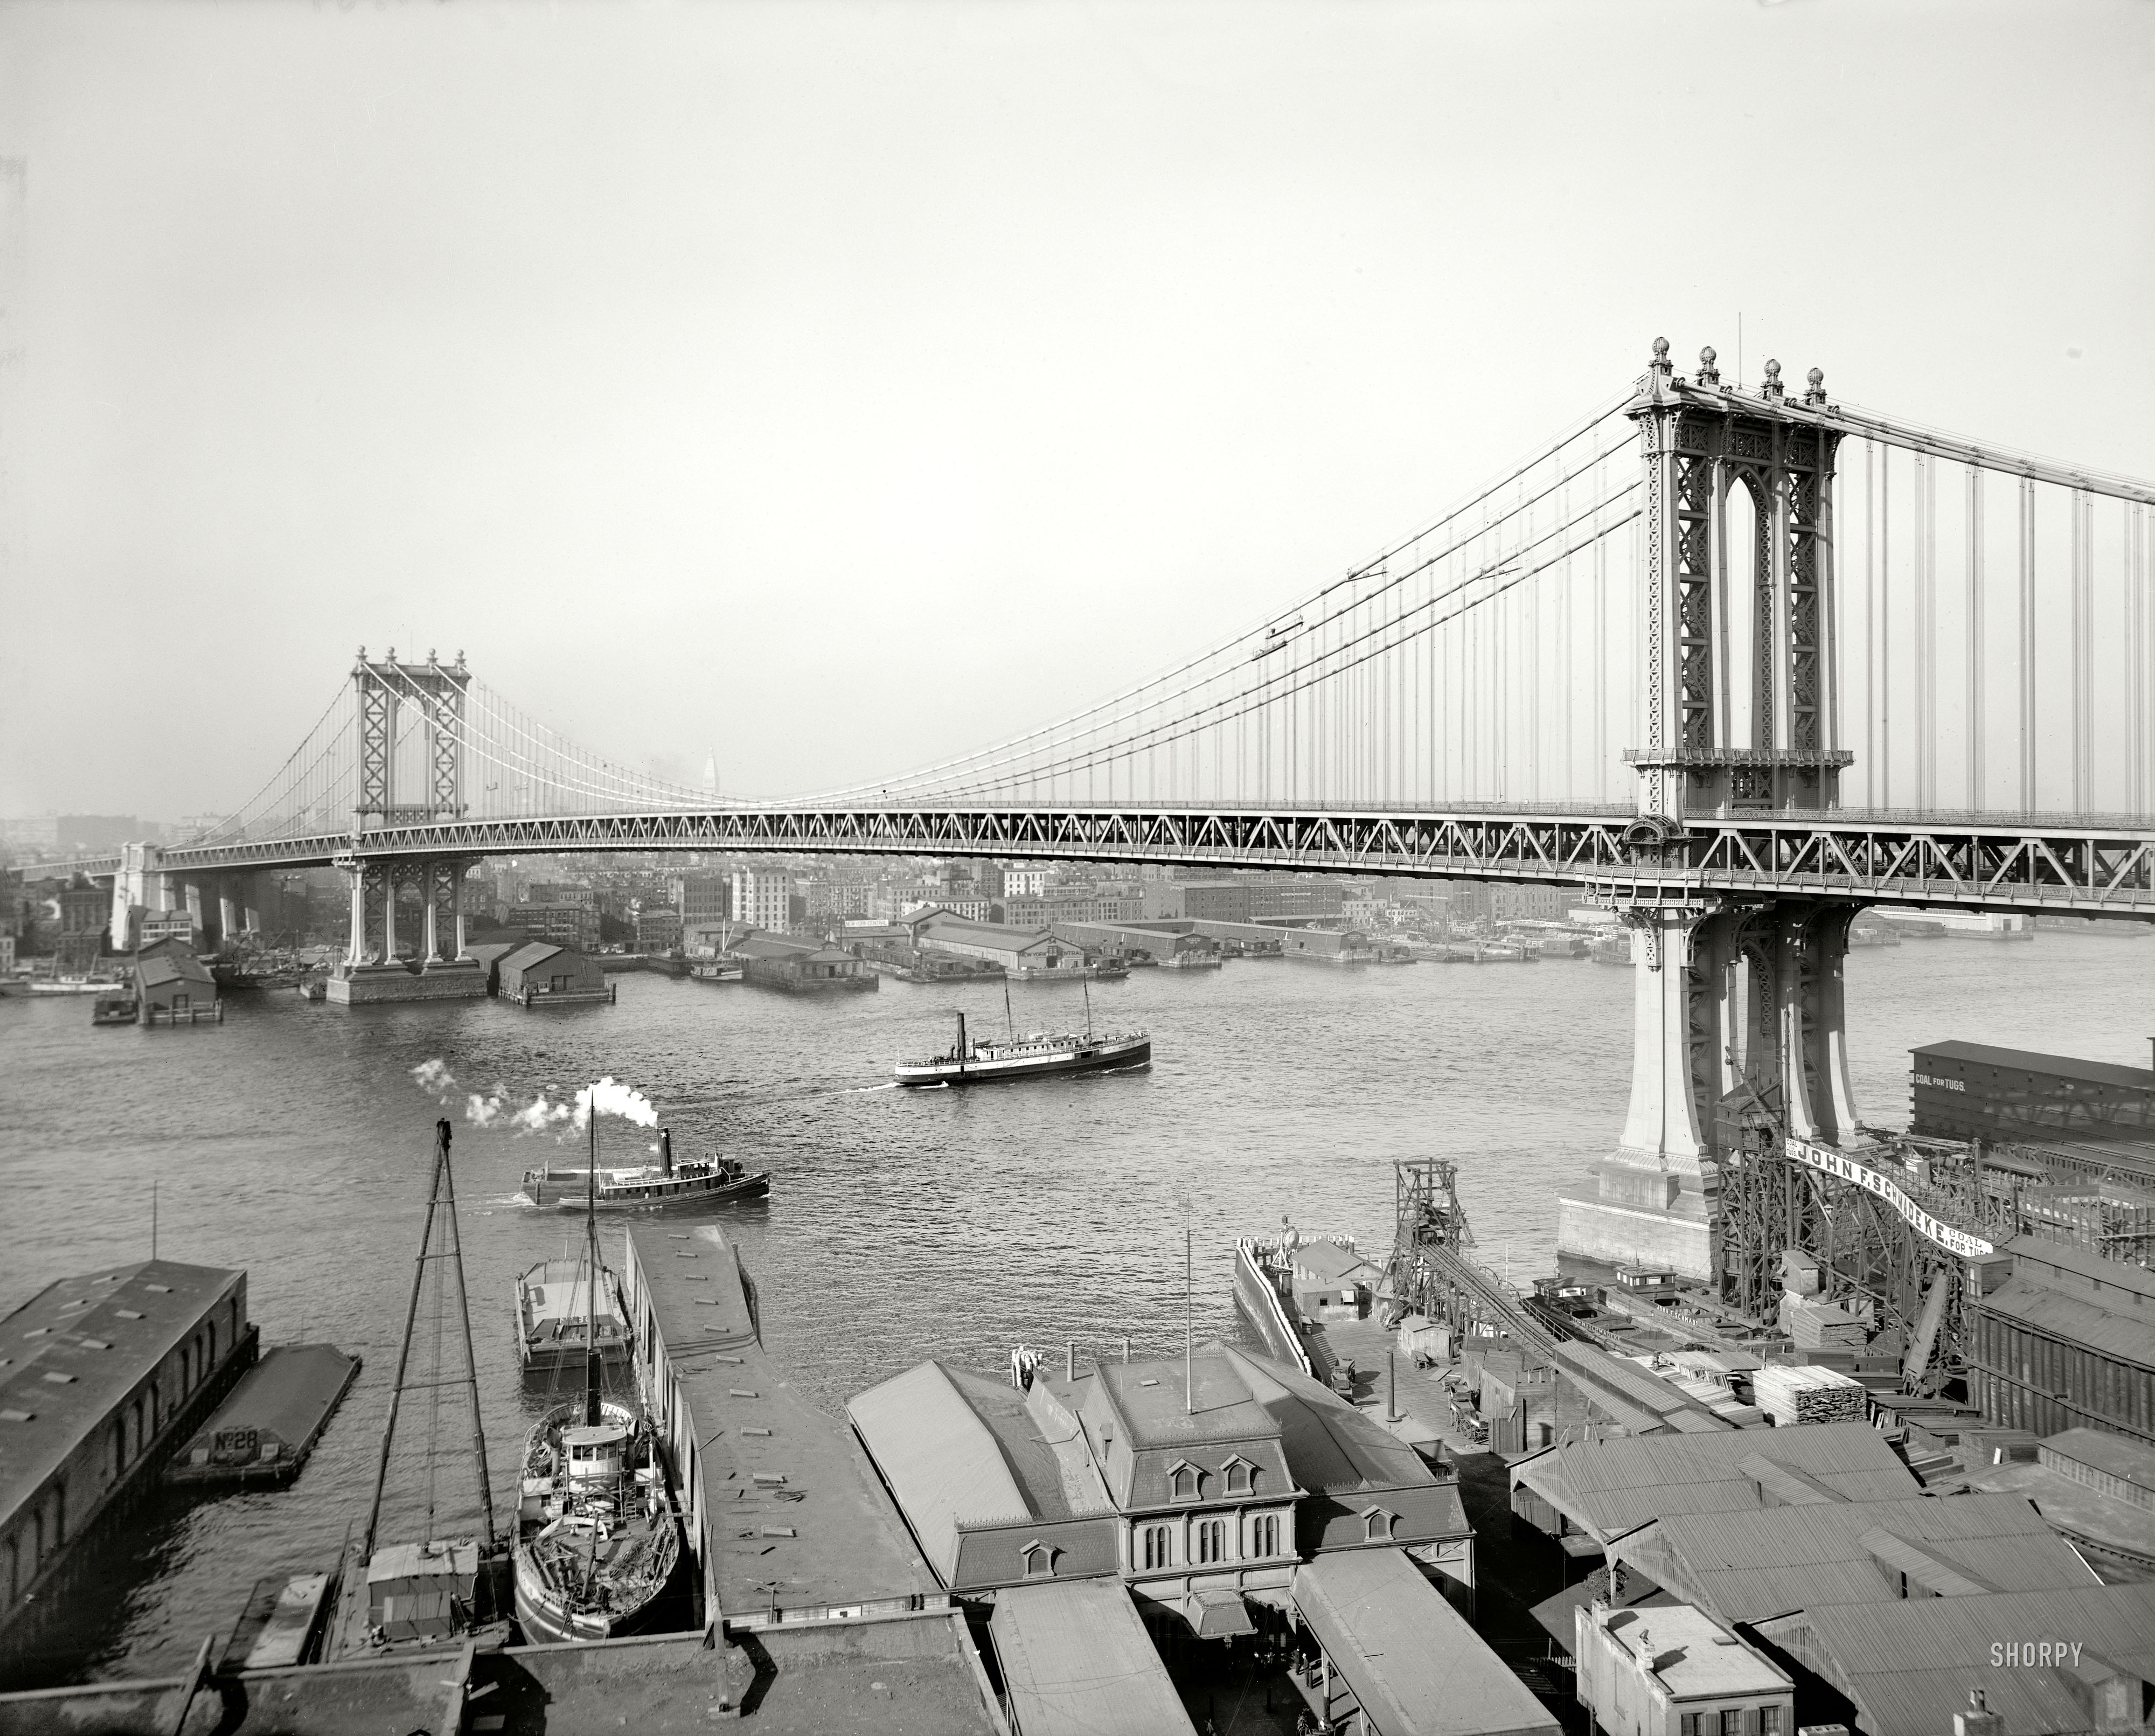 New York circa 1910. "Manhattan Bridge and East River from Brooklyn." 8x10 inch dry plate glass negative, Detroit Publishing Company. View full size.